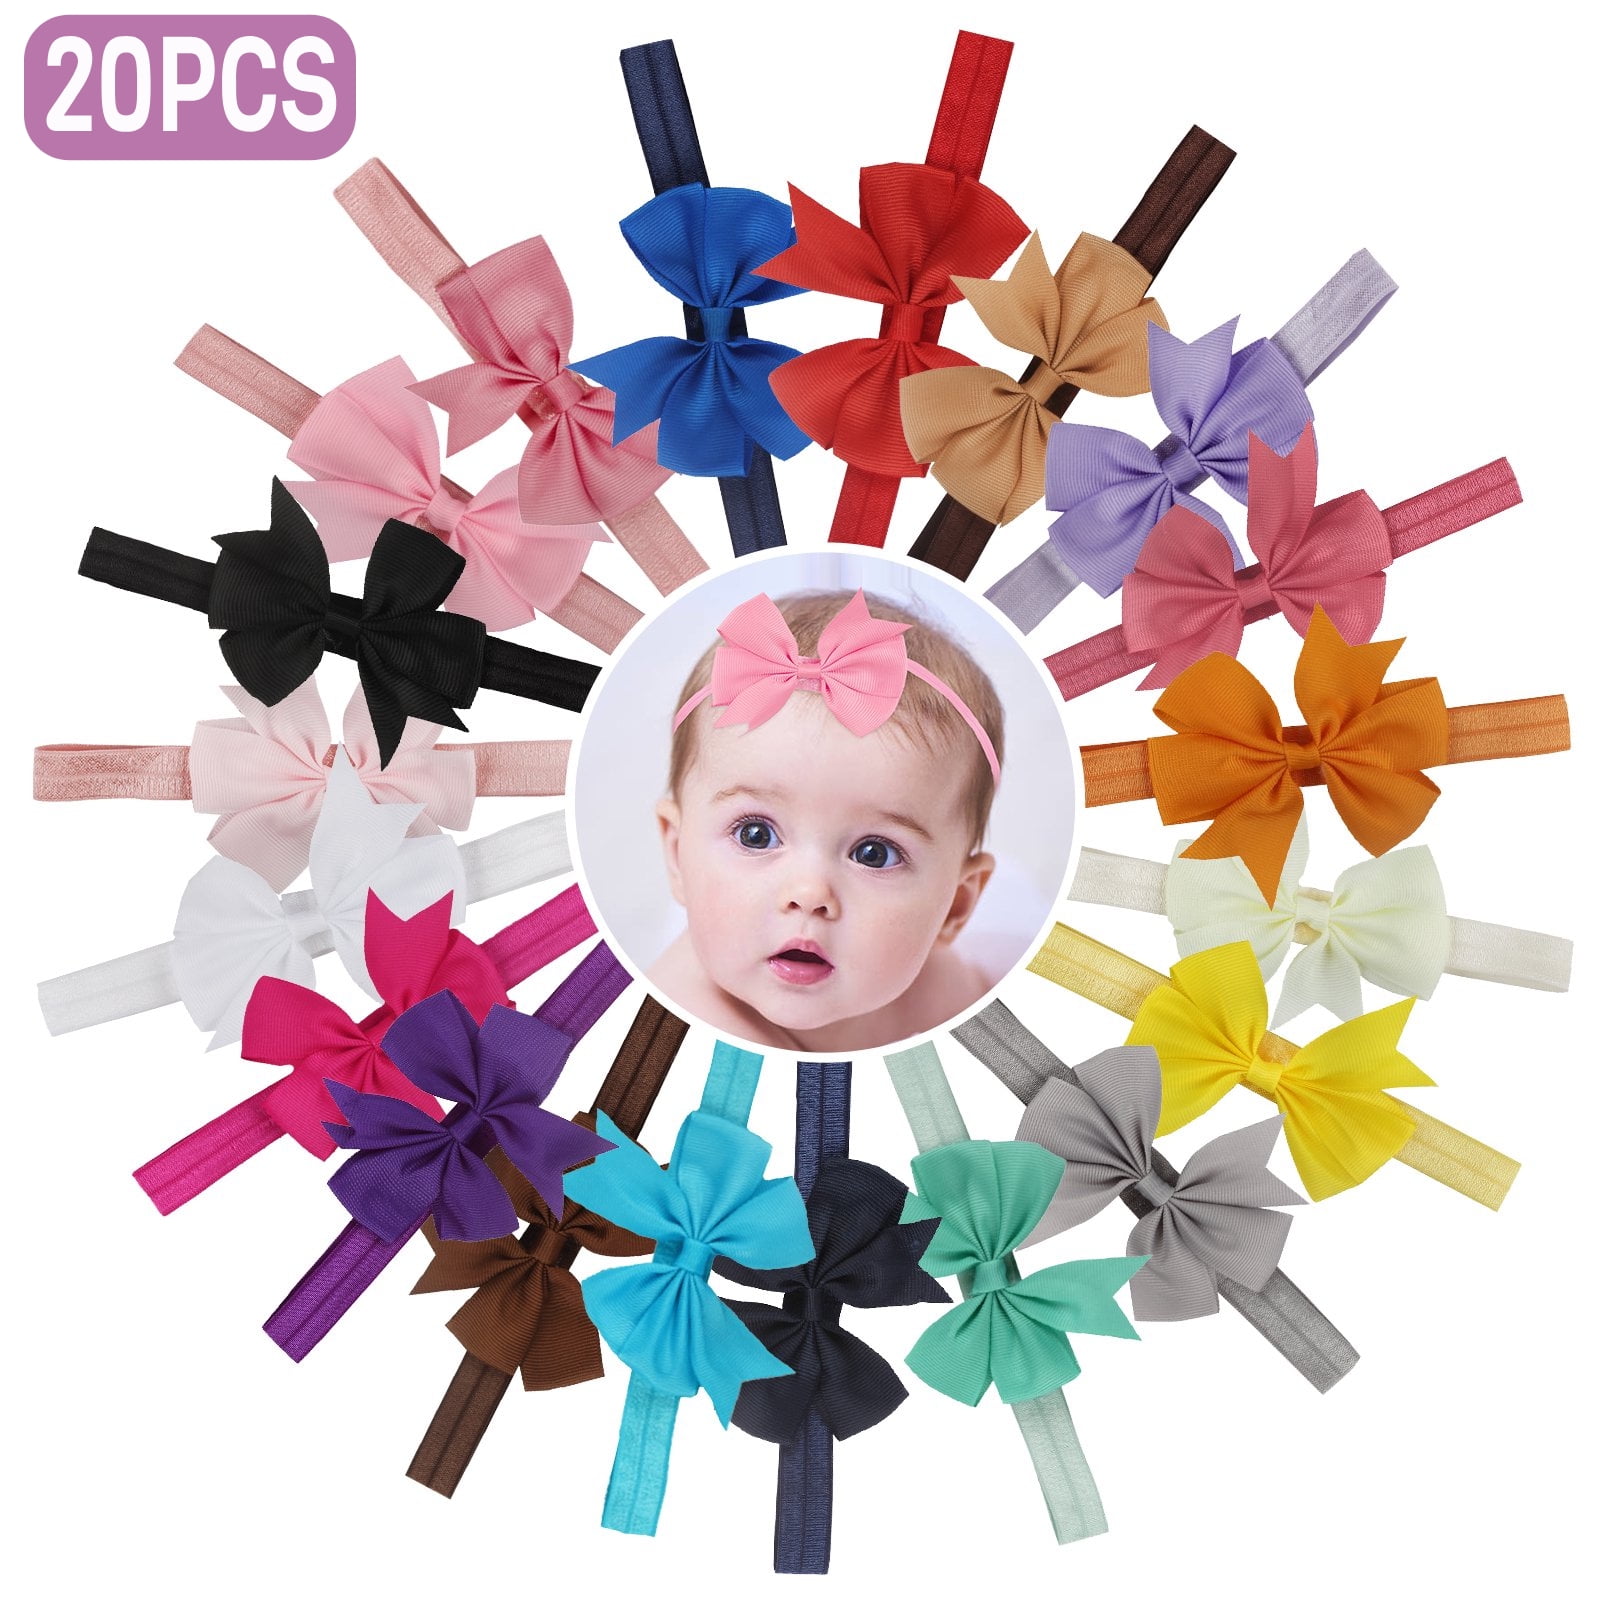 Whatyiu 6Pcs/Set 4.3In Hair Bows Clips for Girls,Children Sequins Bow Barrettes Cute Baby Girl Bow Hair Clips 